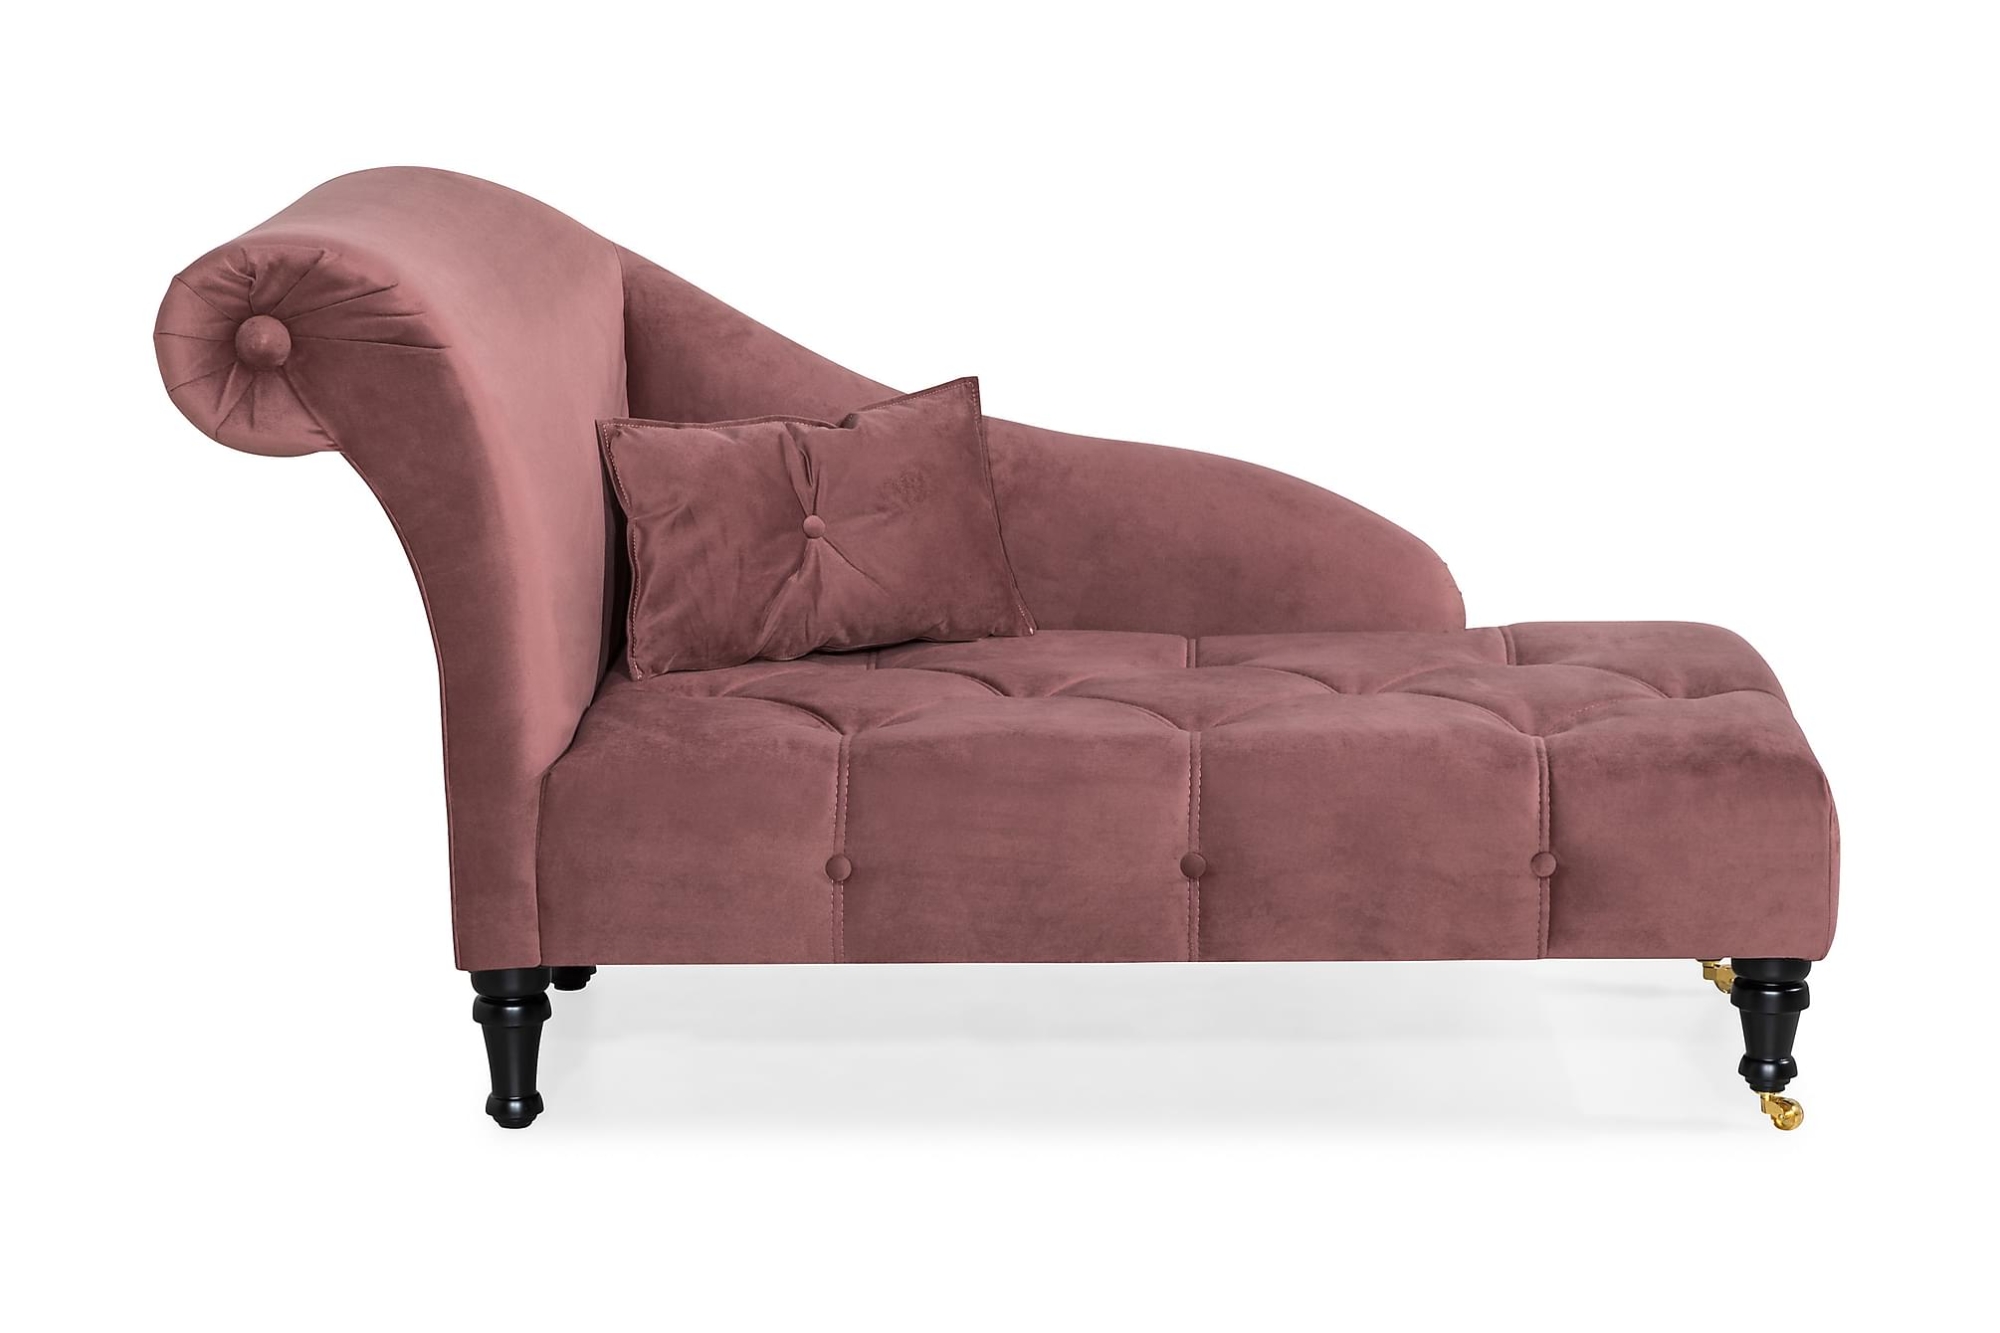 Dahlia Daybed, Rosa Velour